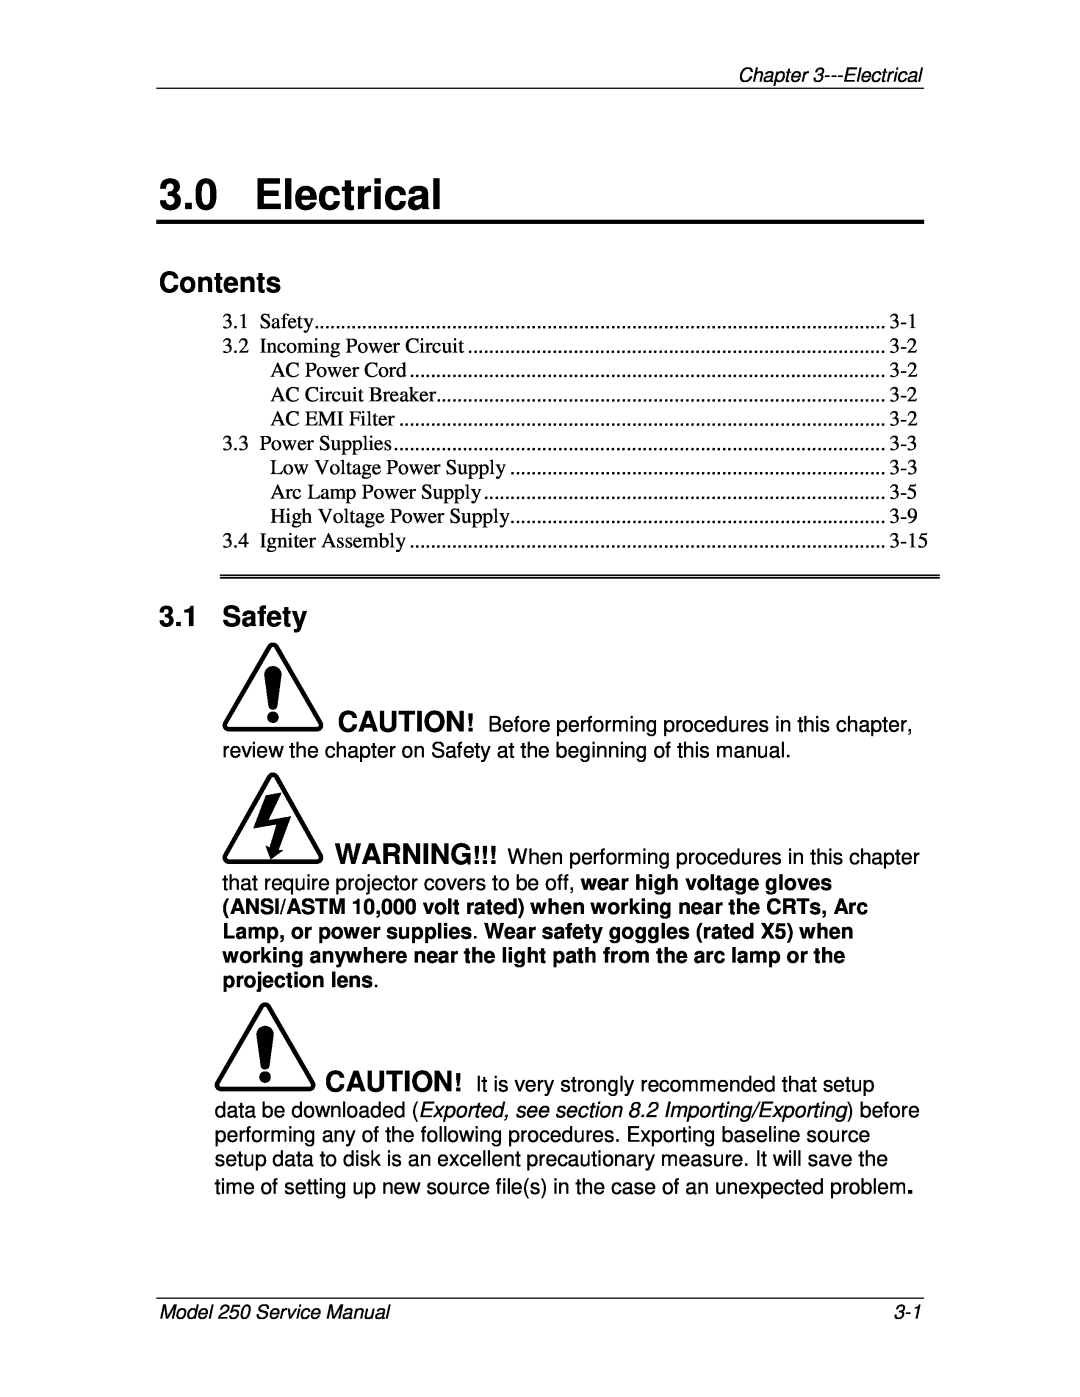 JVC 250 service manual Electrical, Safety, Contents 